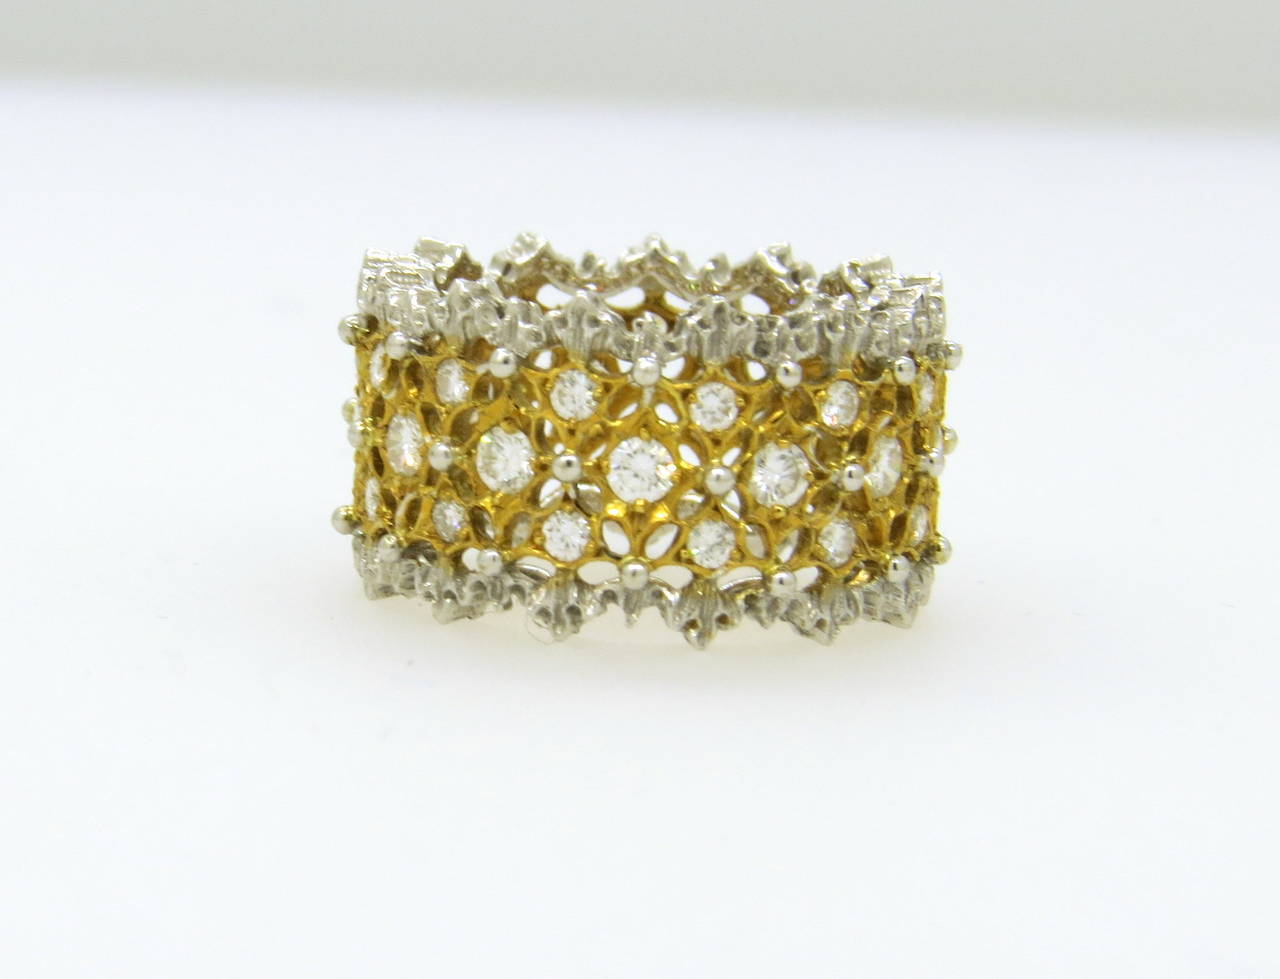 Buccellati 18k white and yellow gold ring with diamonds from Rombi collection. Ring size is 3 3/4, ring is 10mm wide. Marked Buccellati. weight - 4.8 gr